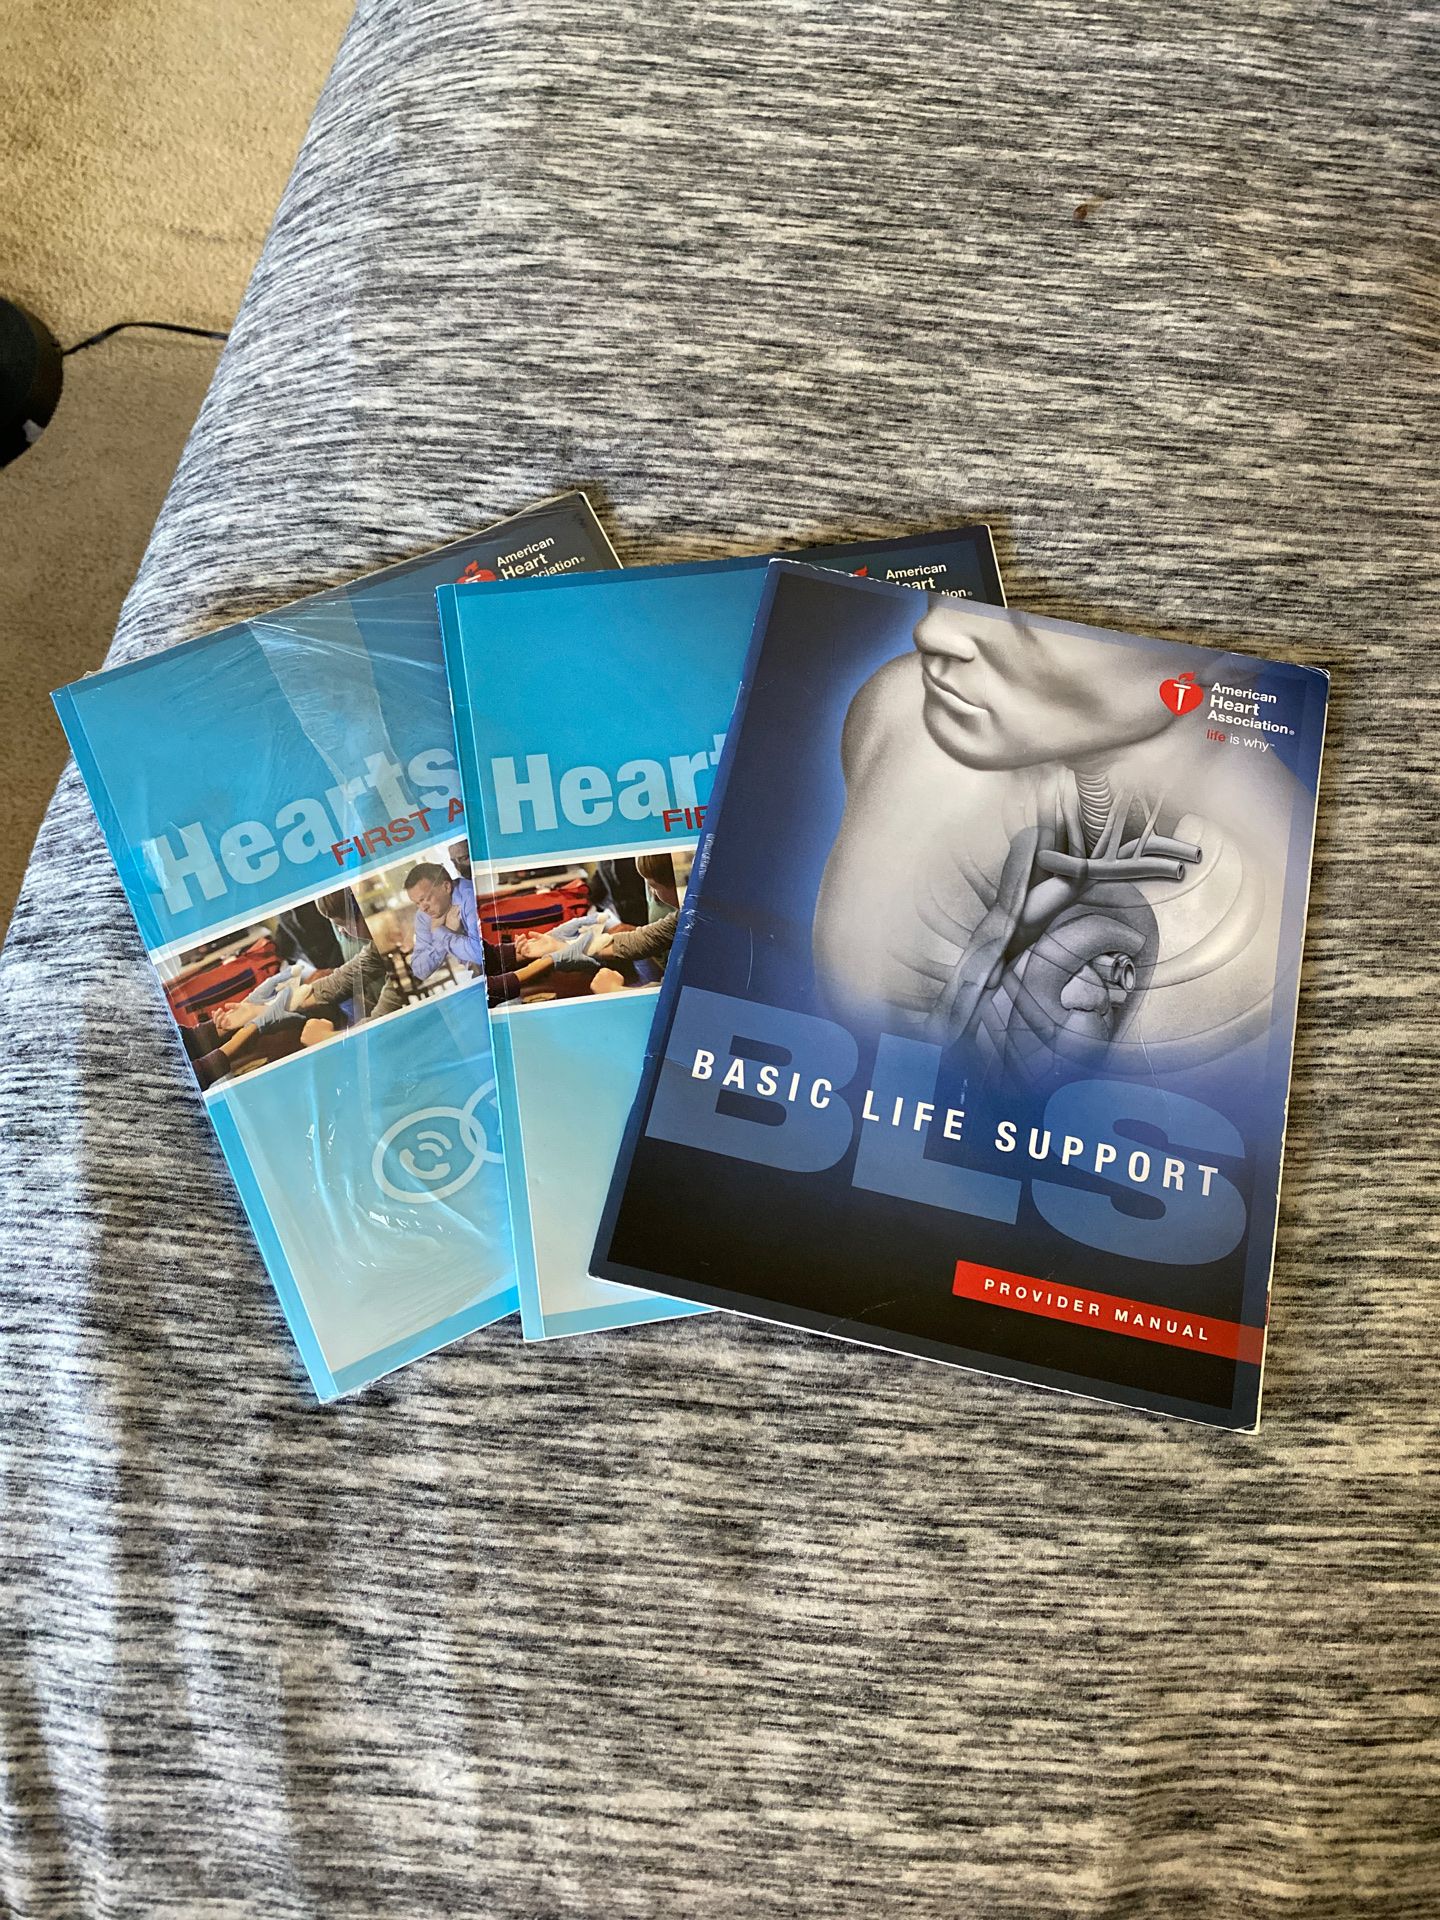 Heartsave first aid and cpr are & basic life support book